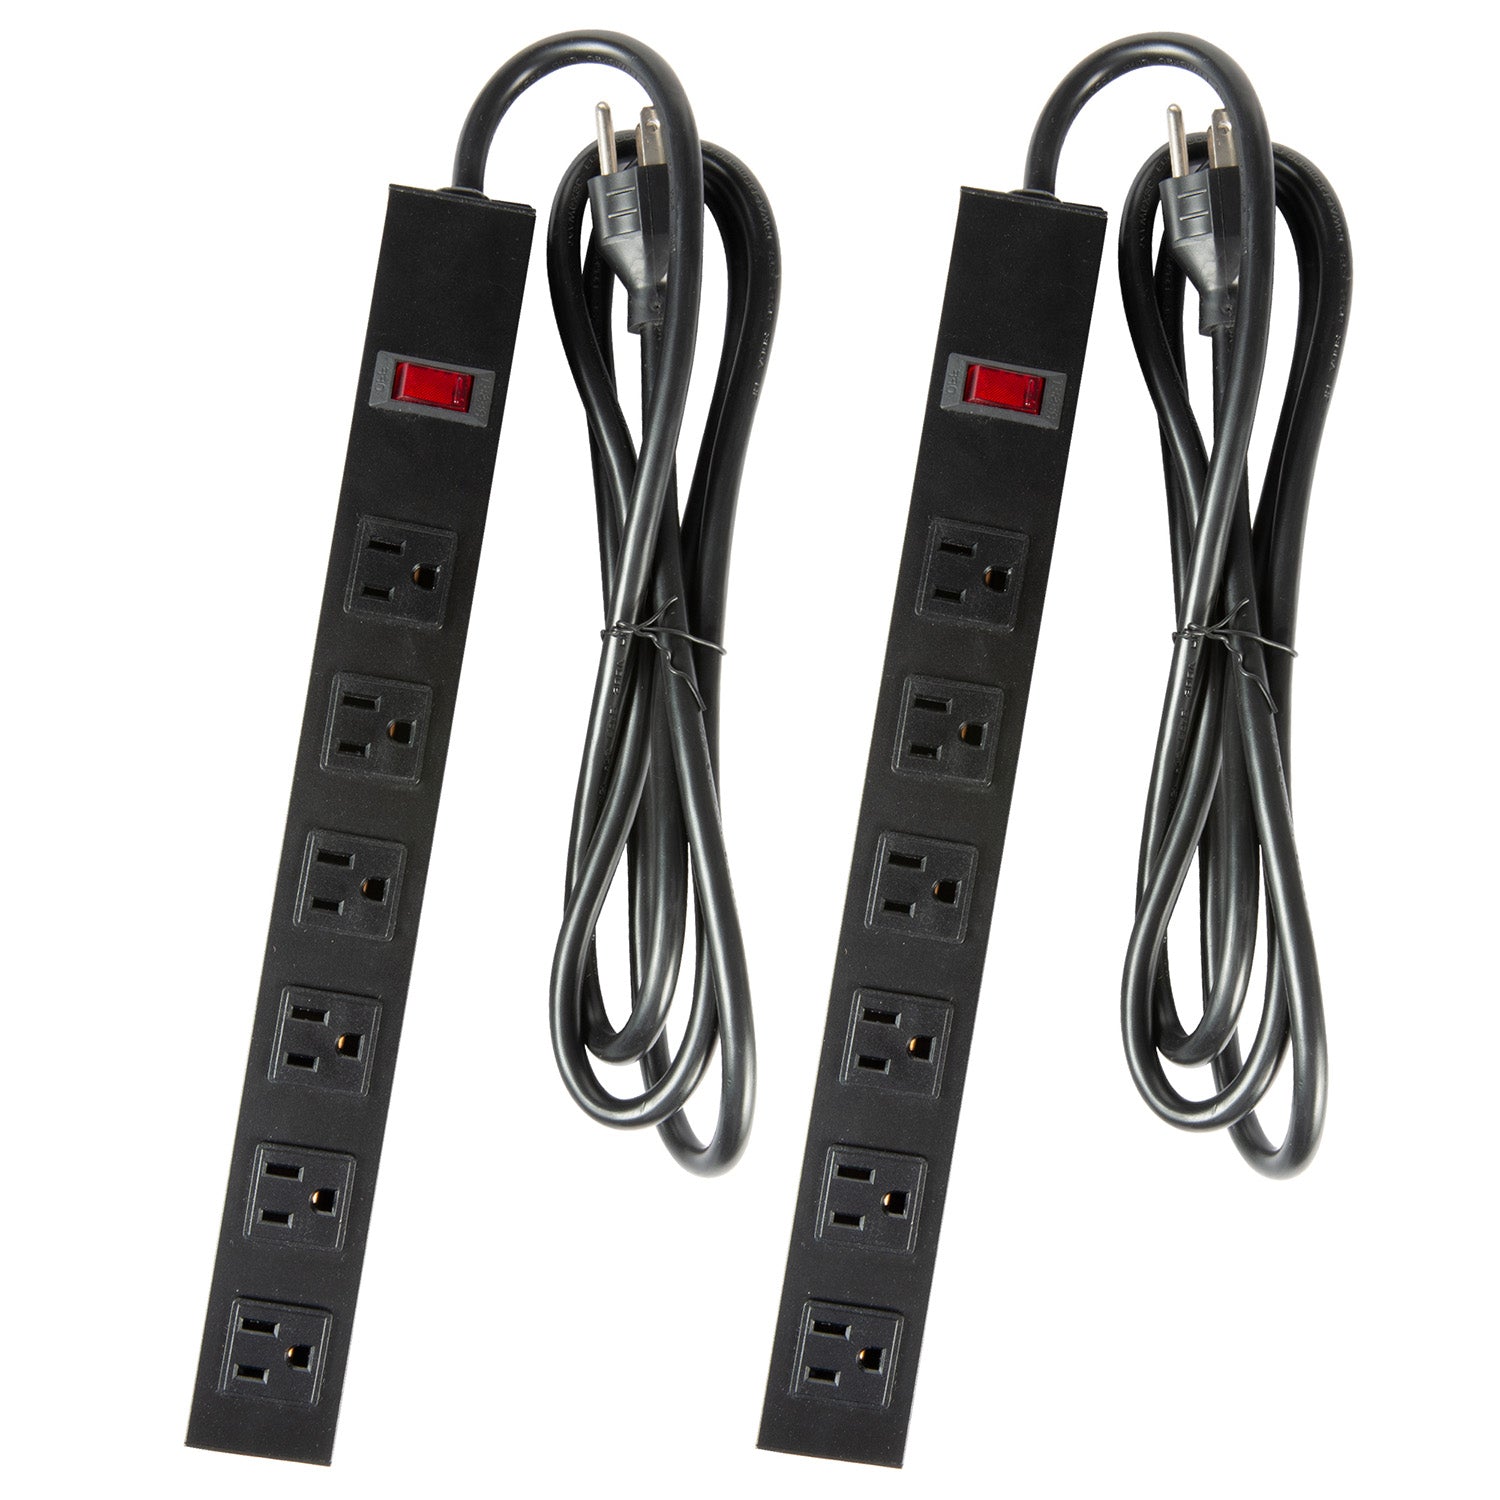 Set of 2 Power Strip with 6 Outlets 6 ft Extension Cord Wall Mount Metal Power Outlet, Black